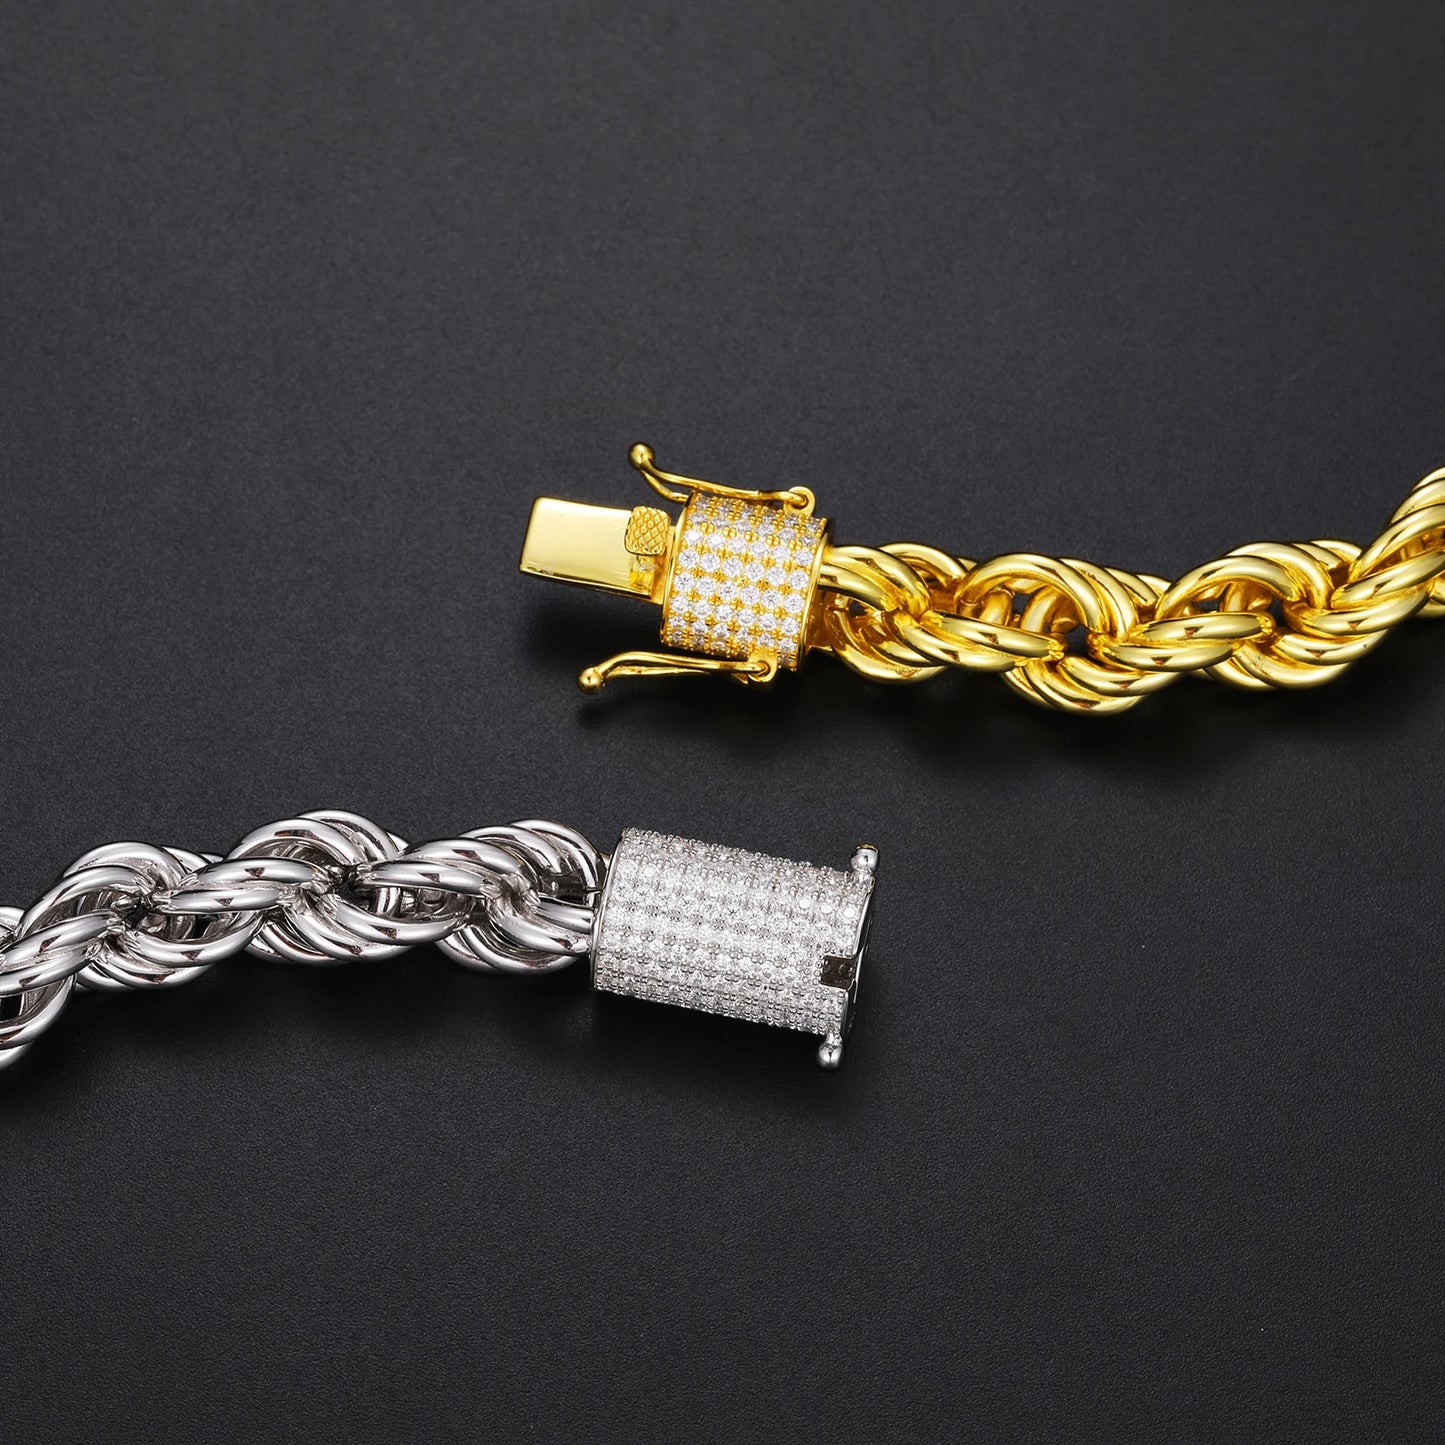 🔥6mm/12mm Luxury 14K 18K Gold Plated Solid 925 Sterling Silver VVS Moissanite Diamond Iced Out Lock Rope Chain Necklace For Men🔥